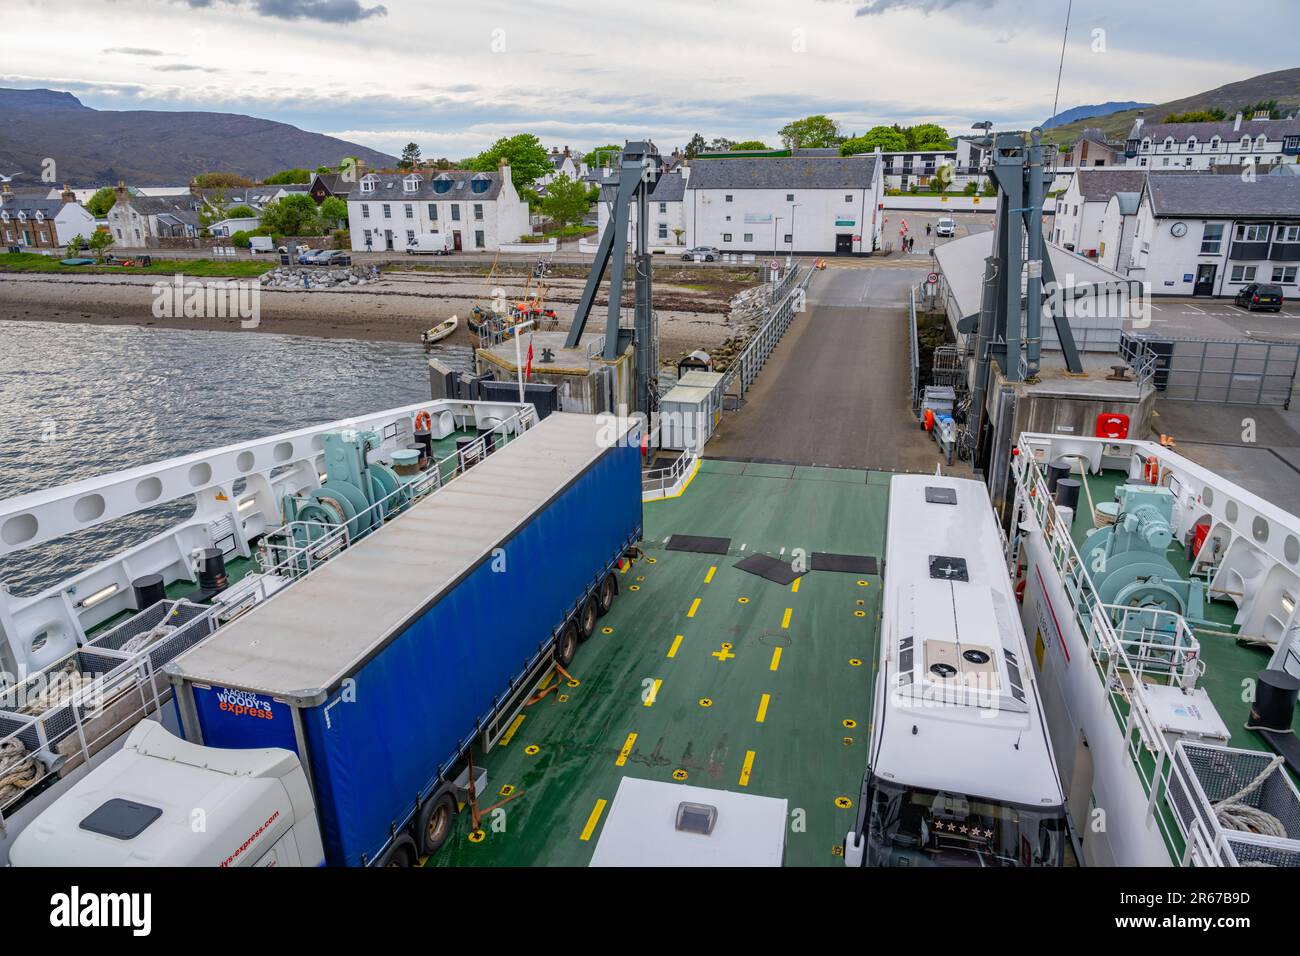 Looking down on the car deck of Calmac ferry Loch Seaforth in Ullapool Scotland Stock Photo